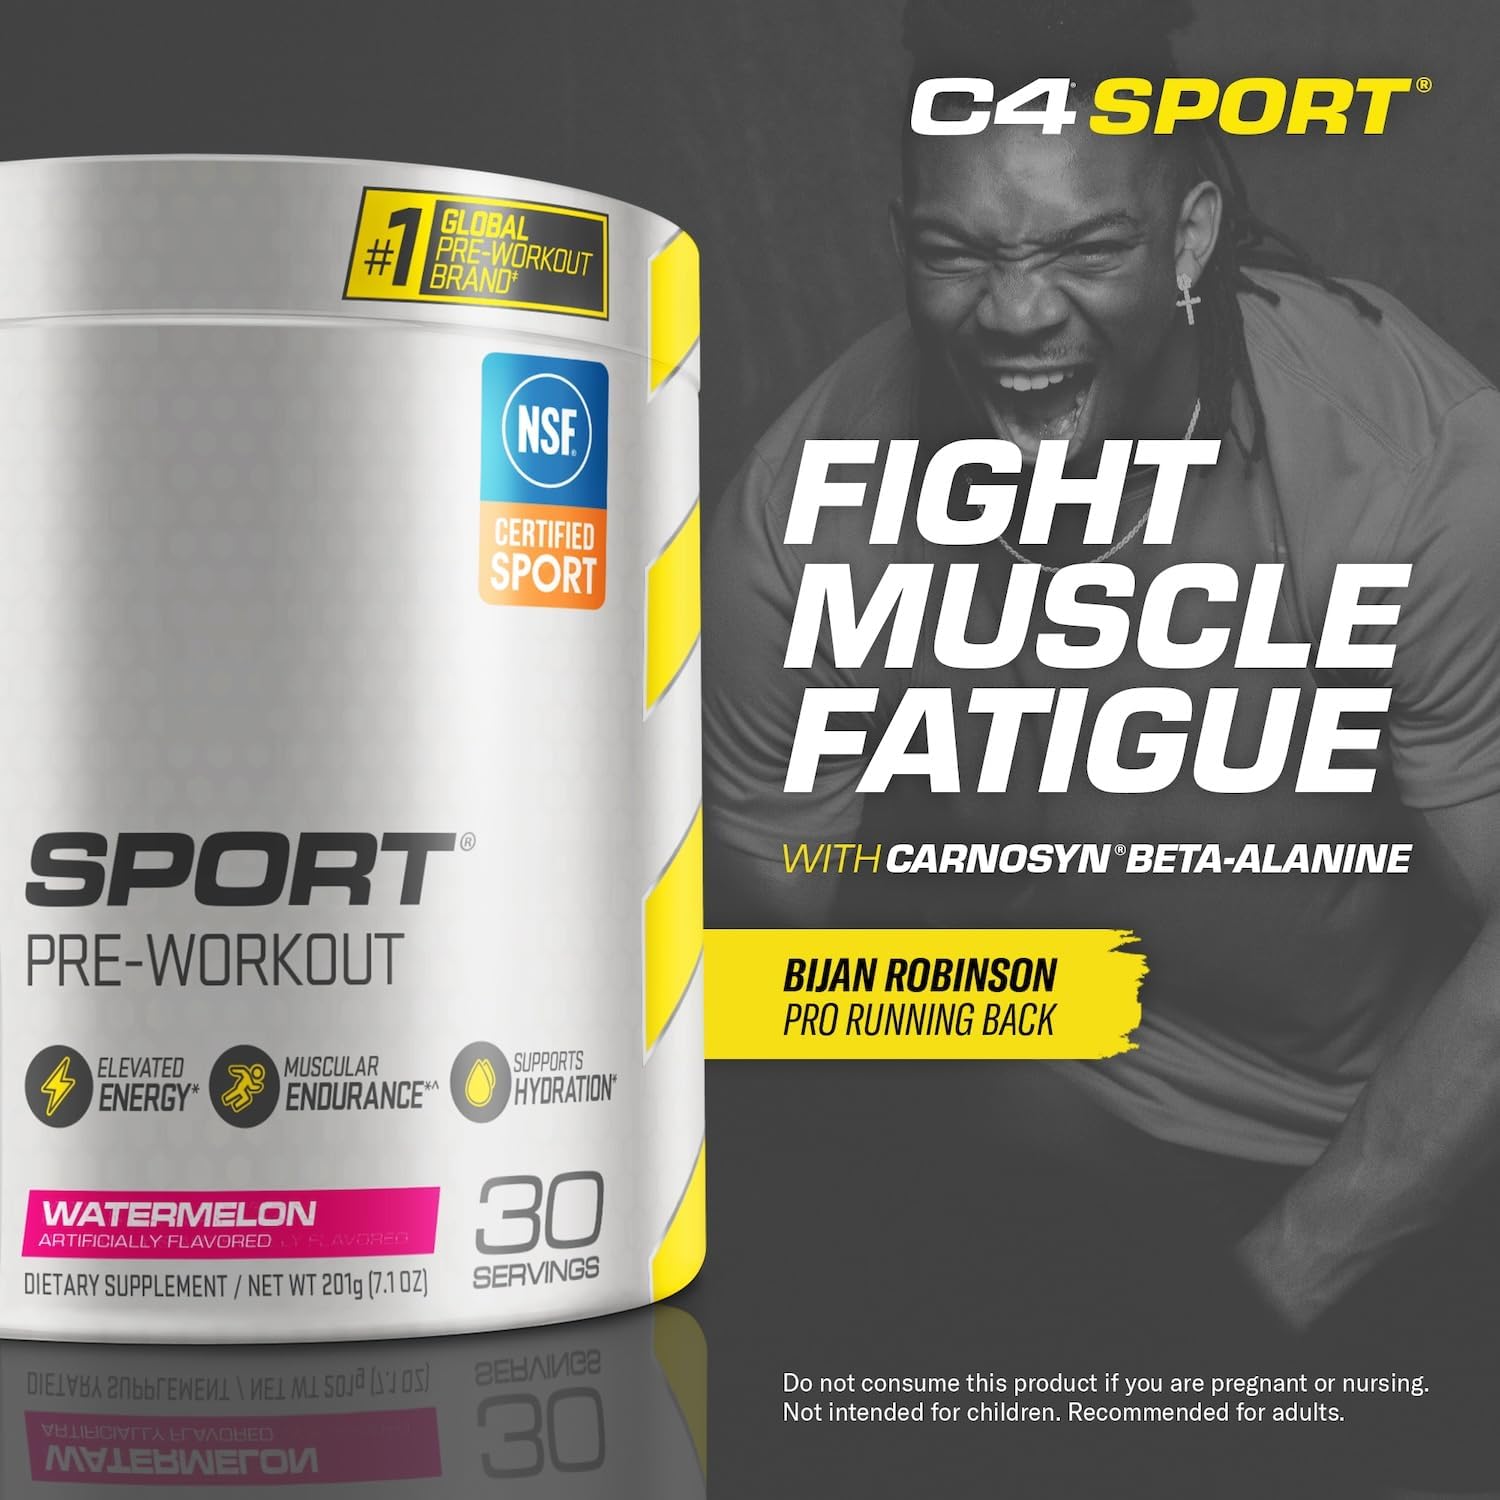 Cellucor C4 Sport Pre Workout Powder Watermelon - Pre Workout Energy with Creatine + 135mg Caffeine and Beta-Alanine Performance Blend - NSF Certified for Sport 30 Servings : Health & Household